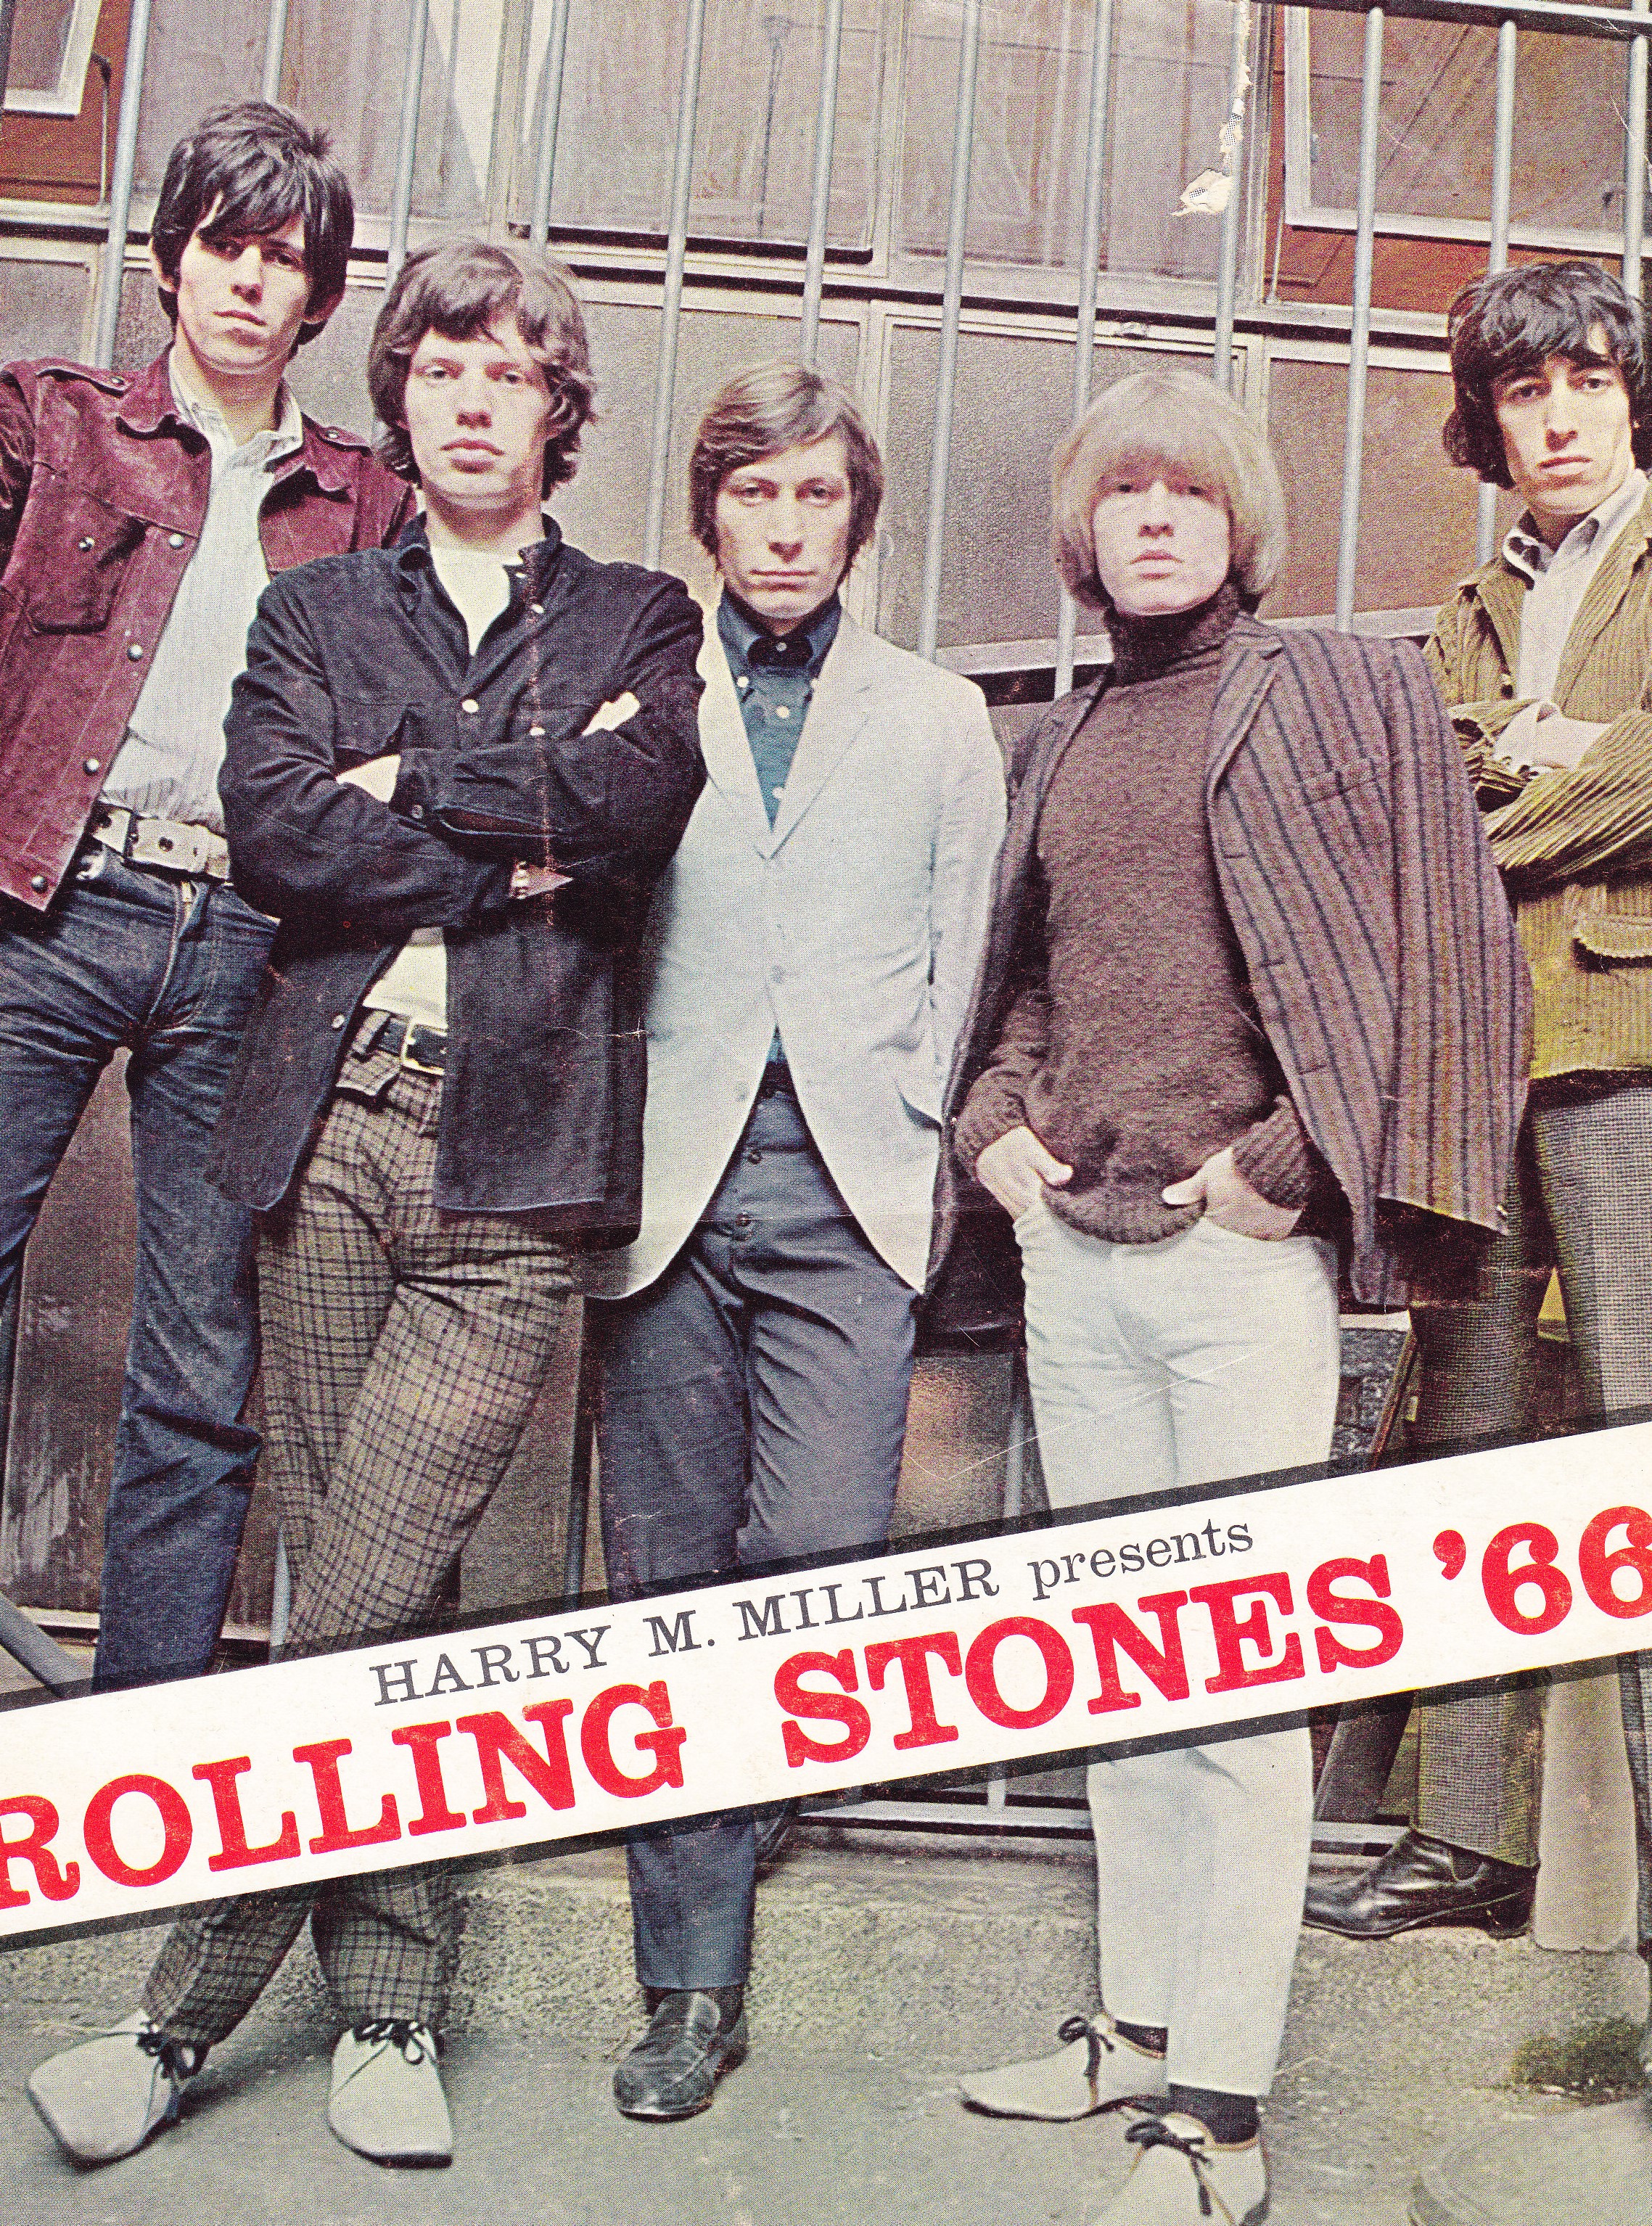 The Rolling Stones programme for their Adelaide Concert in 1966.